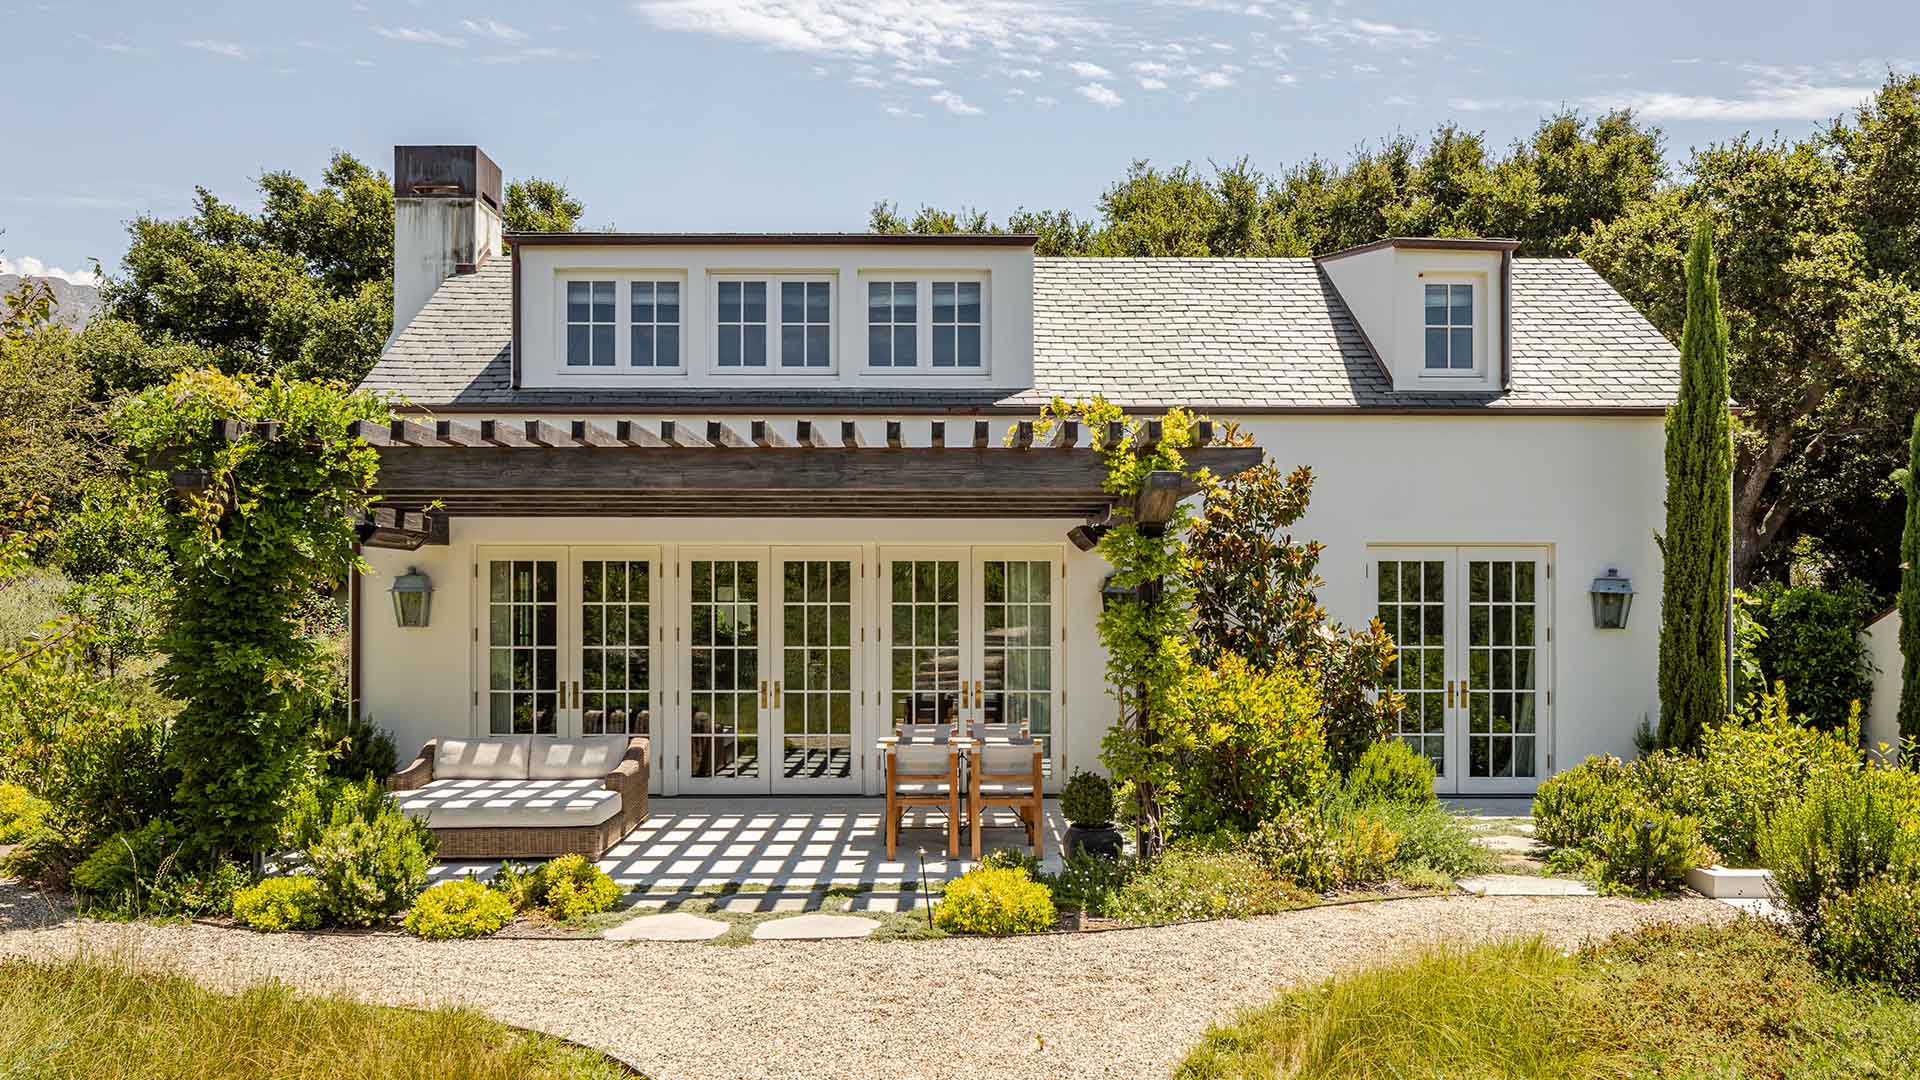 Gwyneth Paltrow Is Renting Out Her Montecito Guesthouse for Free on Airbnb for a Full Goop-Style Getaway